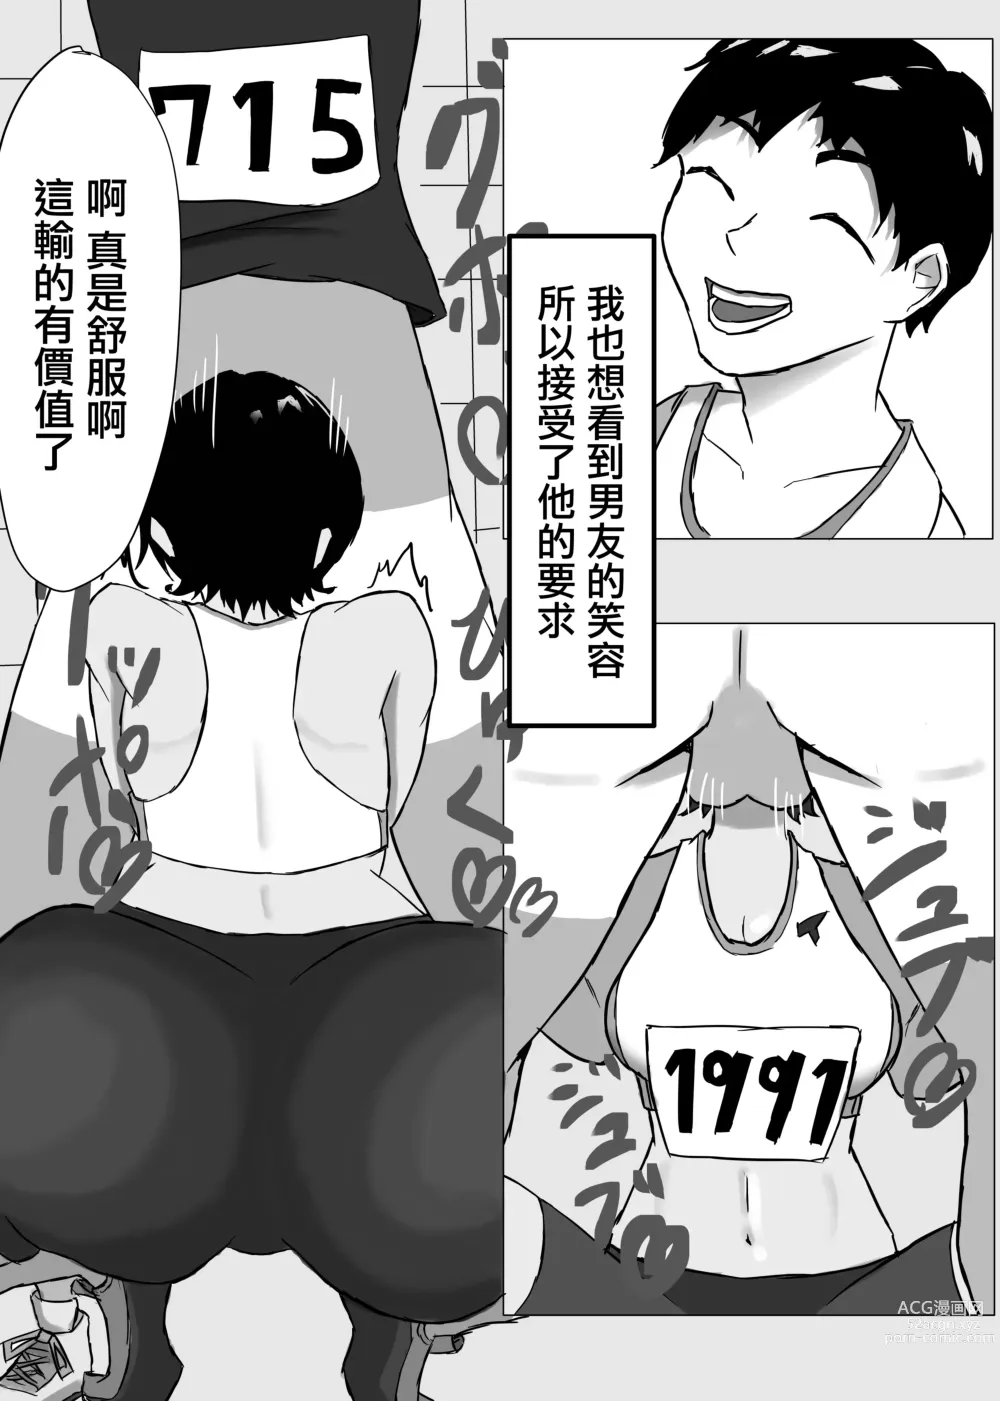 Page 5 of doujinshi 綠帽競爭